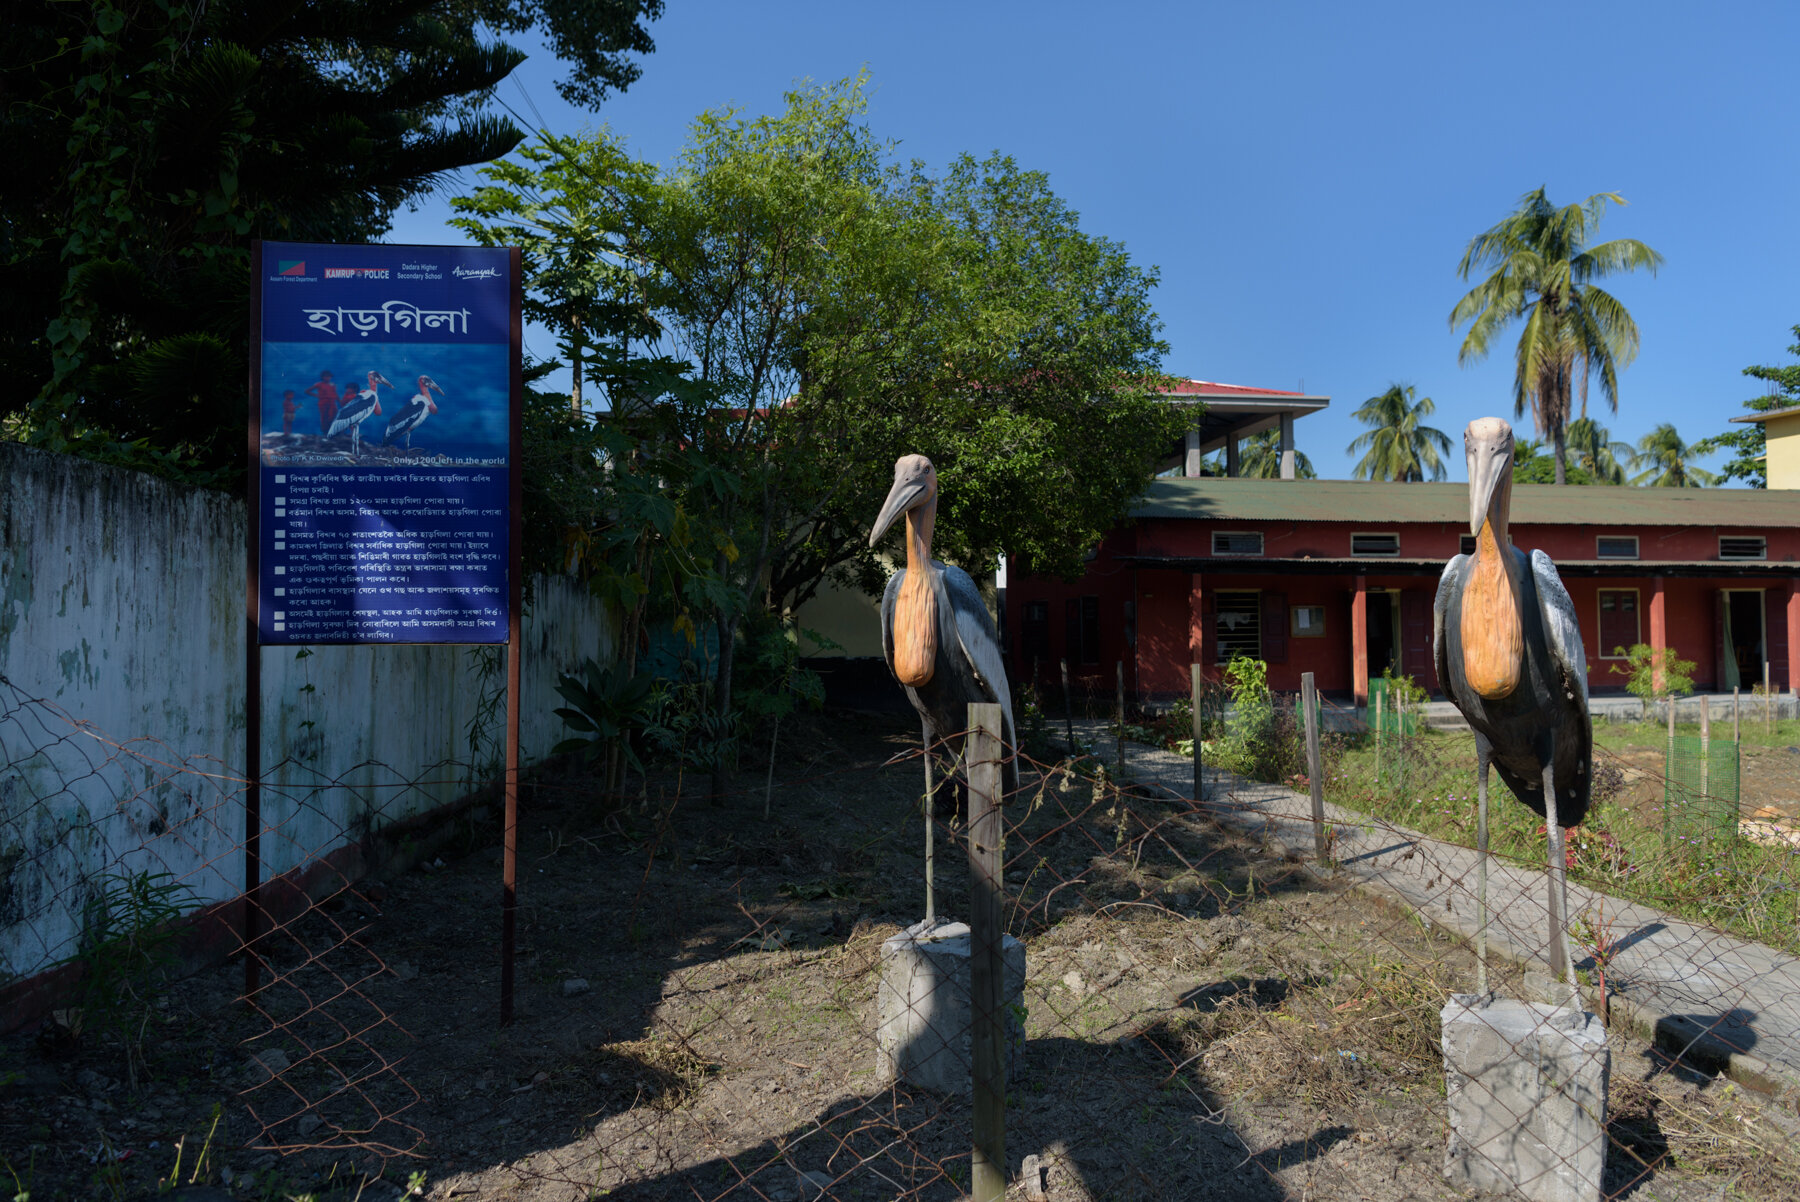  Life size statues of the Greater Adjutant Stork have been installed by biologist Purnima Burman, leader of the Hargila Army at the Dadara High School to raise awareness about the importance of the scavenger birds in their community. Dadara village i